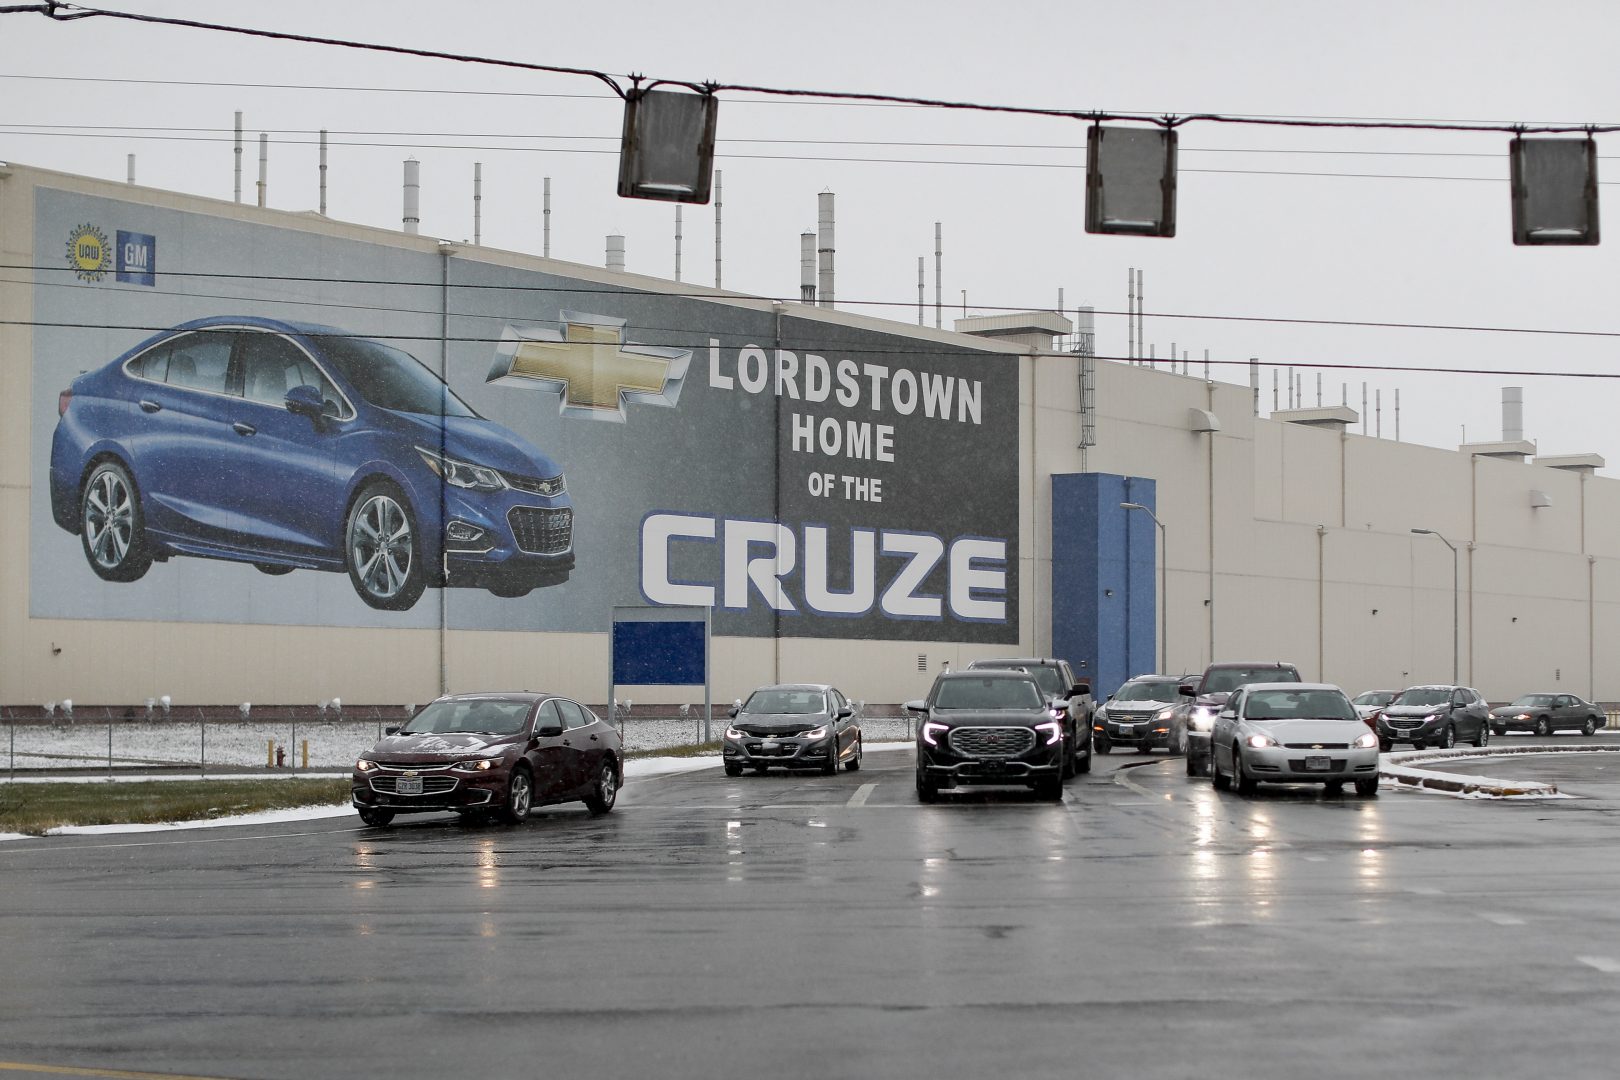 FILE PHOTO: In this Nov. 27, 2018, file photo a banner depicting the Chevrolet Cruze model vehicle is displayed at the General Motors' Lordstown plant in Lordstown, Ohio. An economic renaissance in the industrial Midwest promised by President Donald Trump has suffered in recent weeks in ways that could be problematic for Trump's 2020 re-election. 